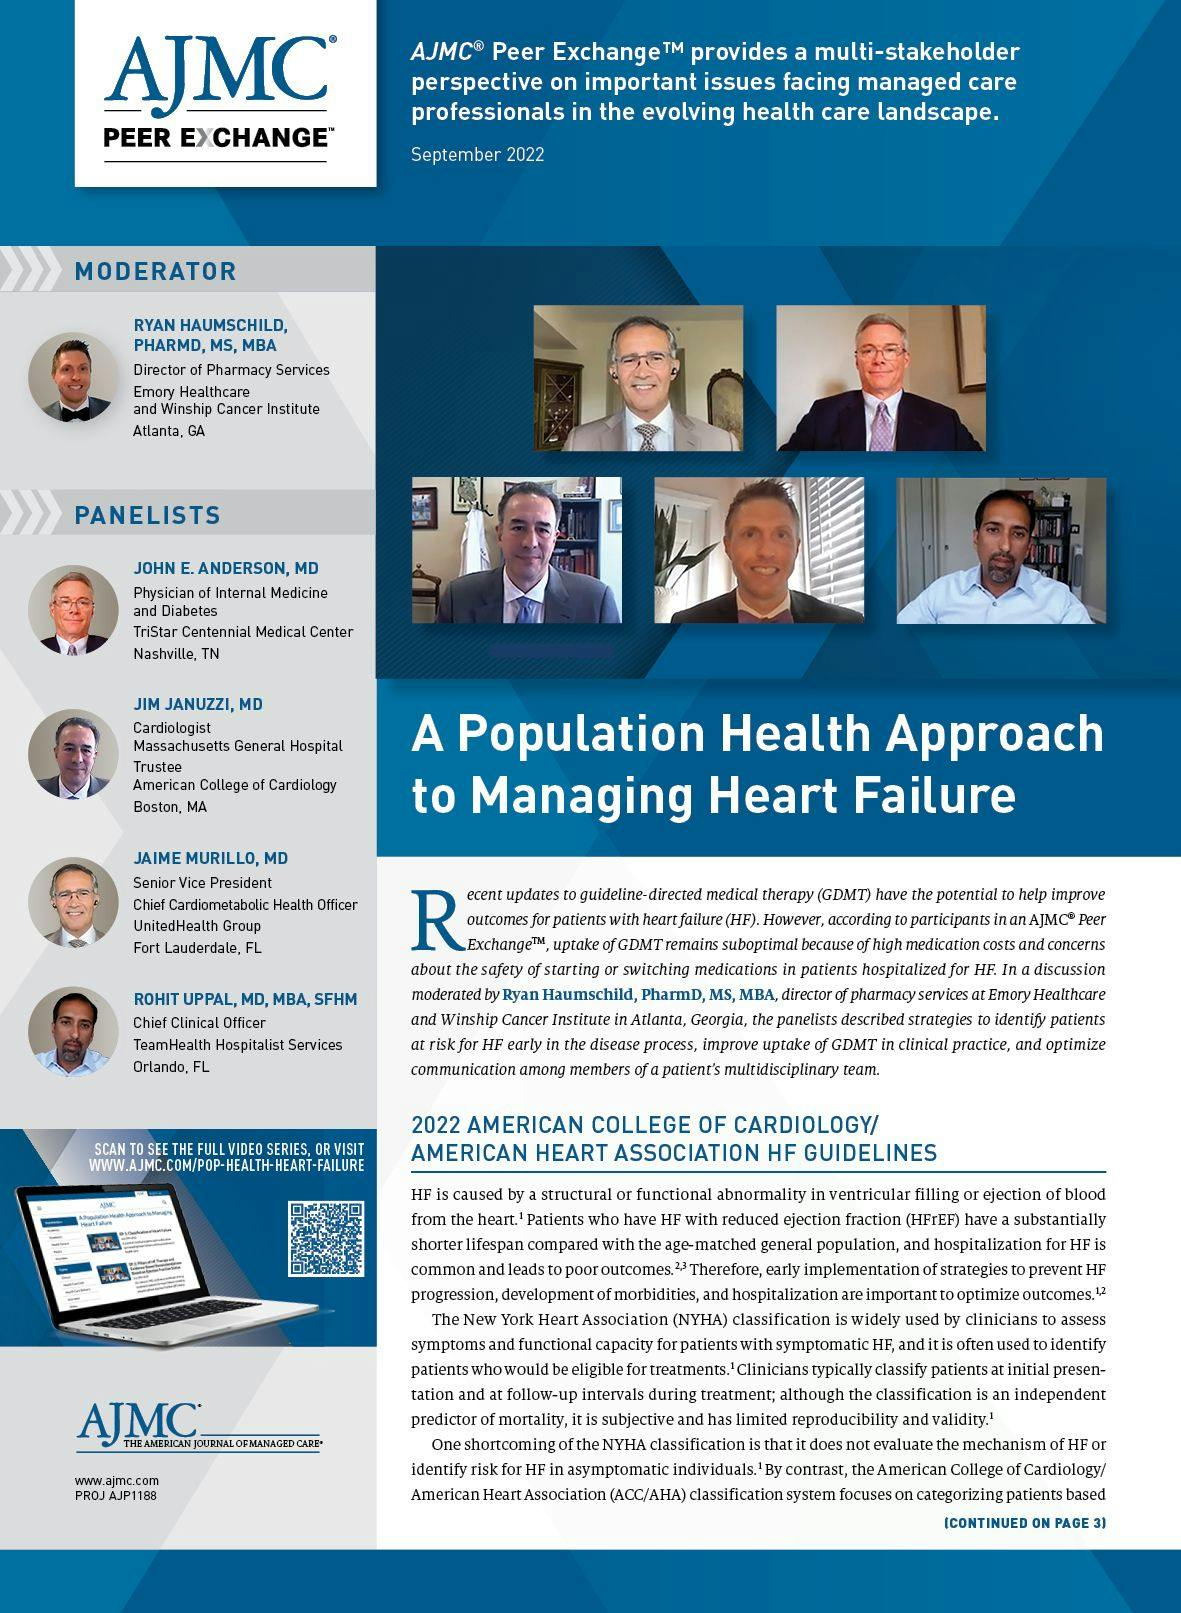 A Population Health Approach to Managing Heart Failure